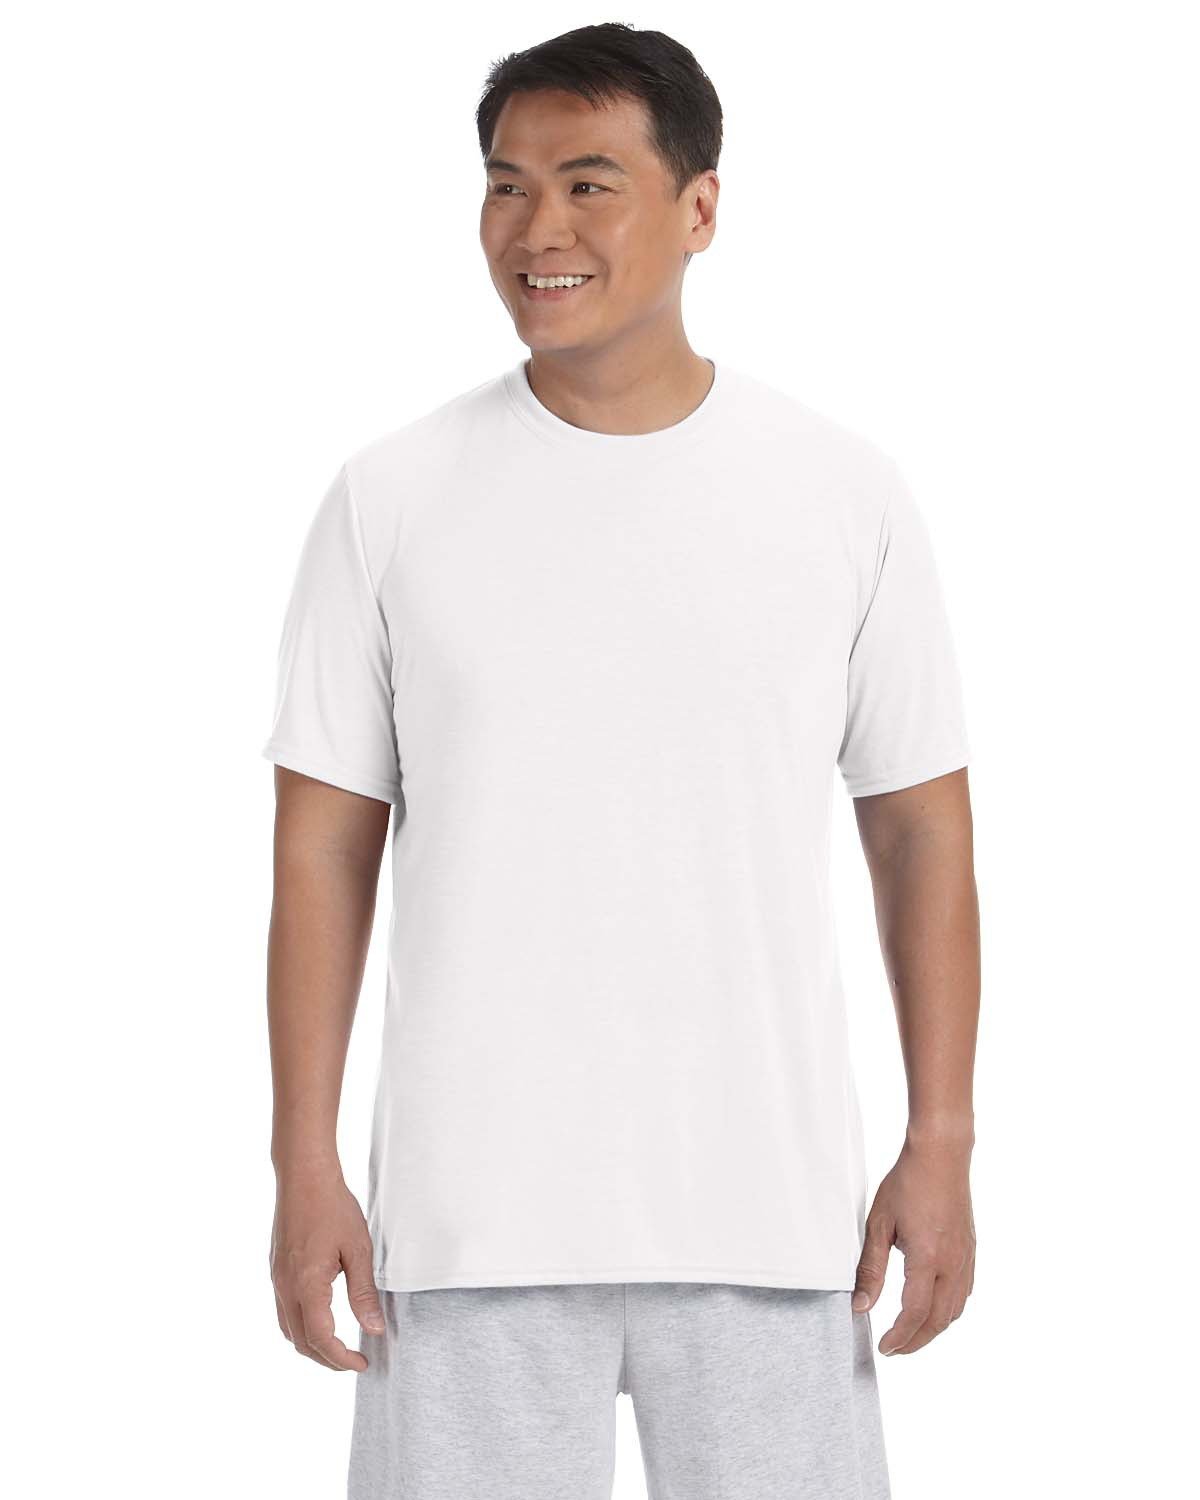 Front view of Adult Performance® Adult 5 Oz. T-Shirt